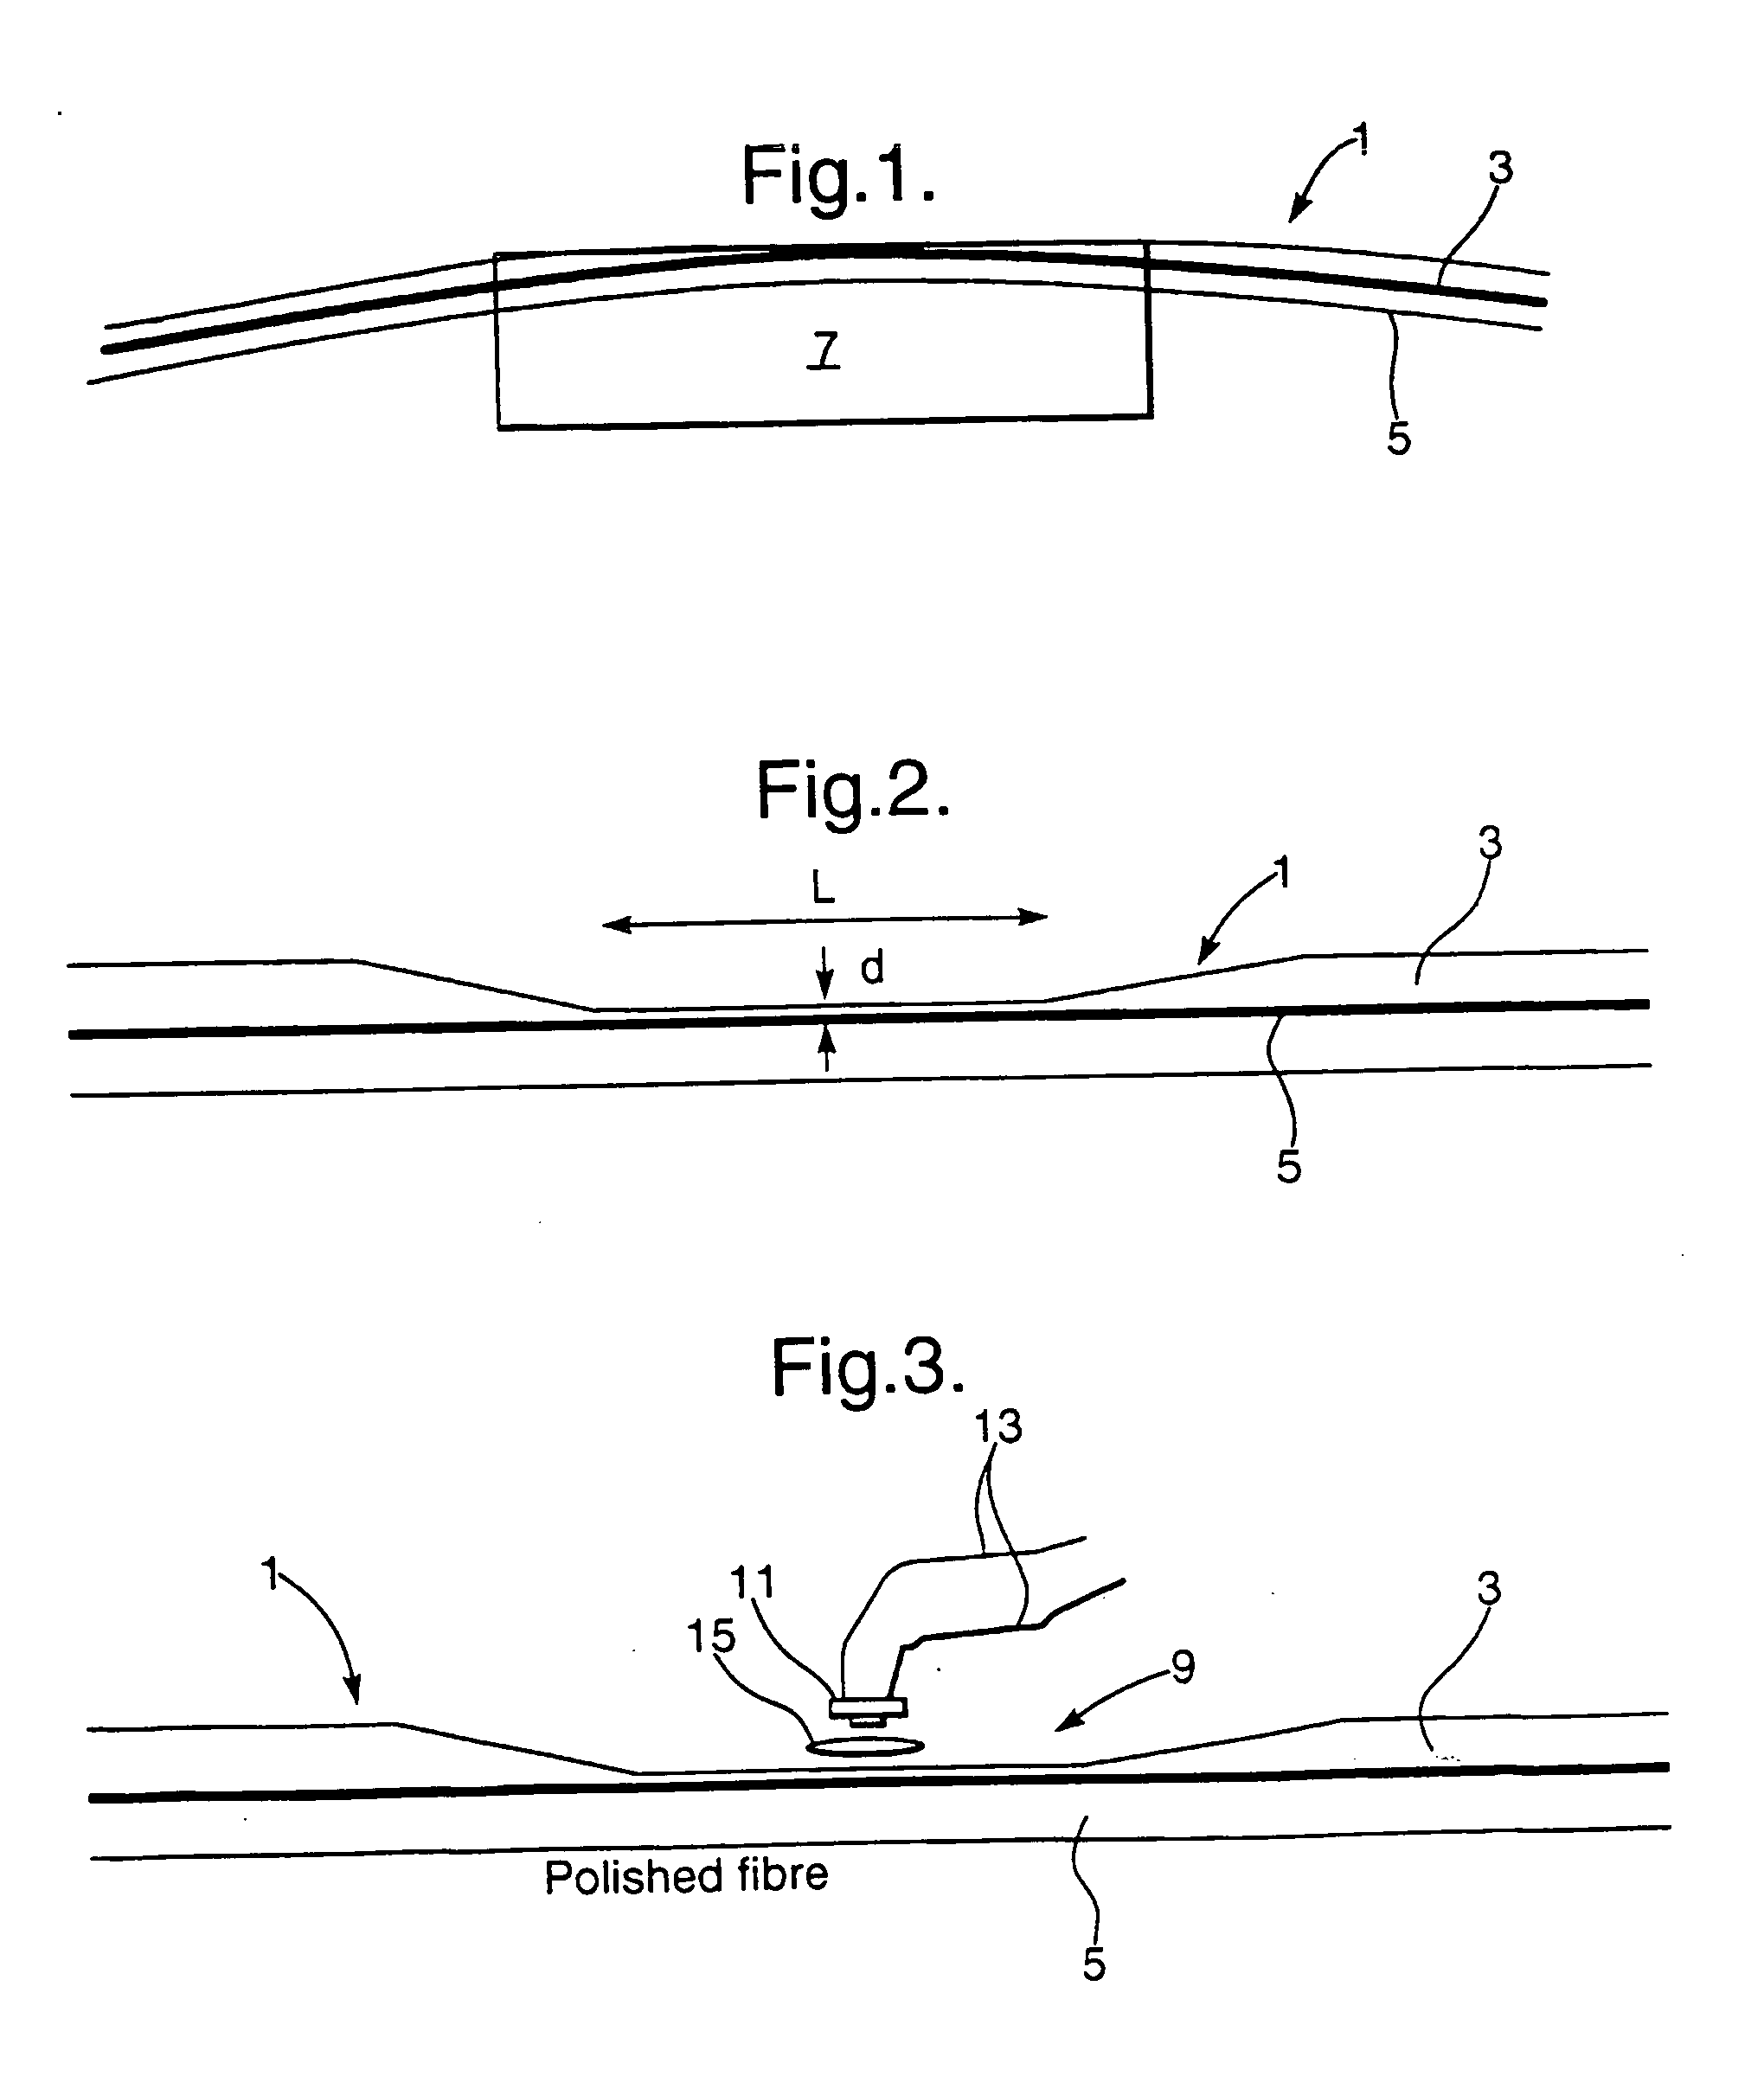 Monitor for an optical fibre and multi-guide optical fibre circuits and methods of making them